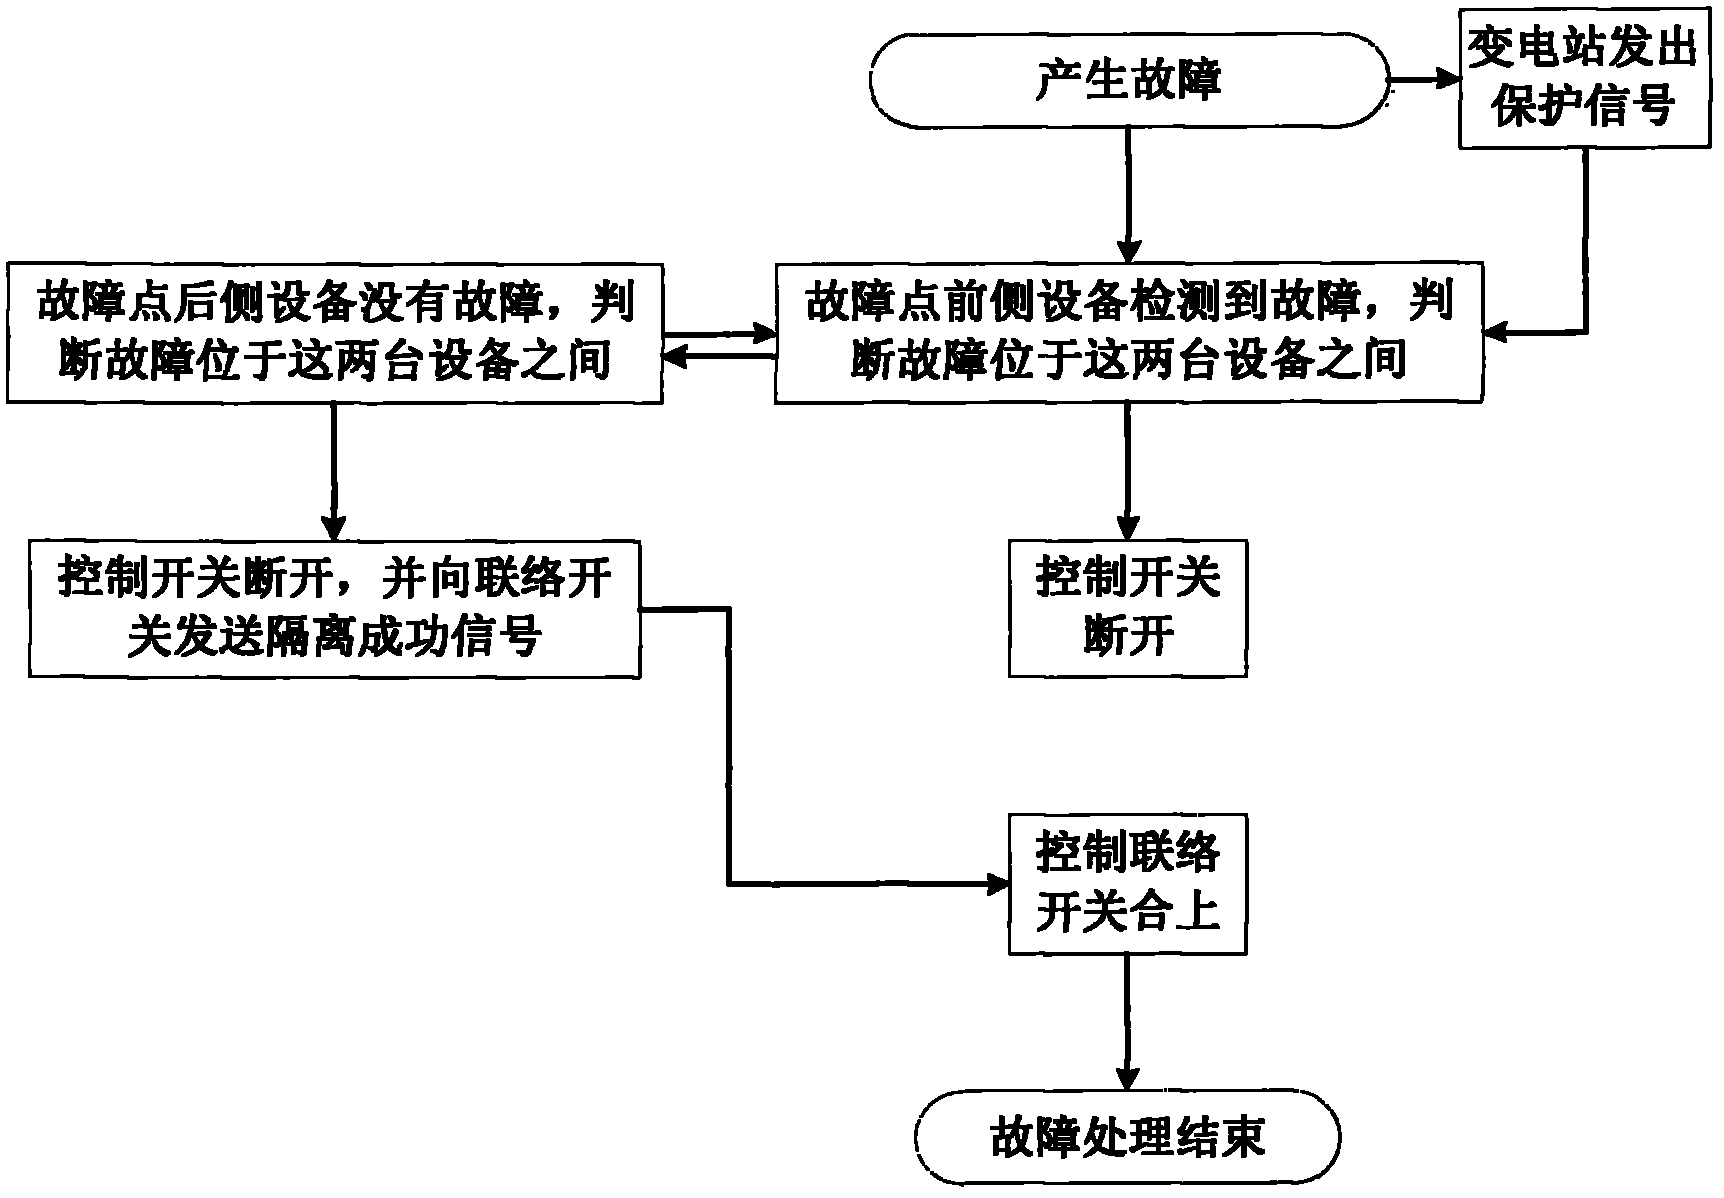 Local self-healing protection method of distribution network automation